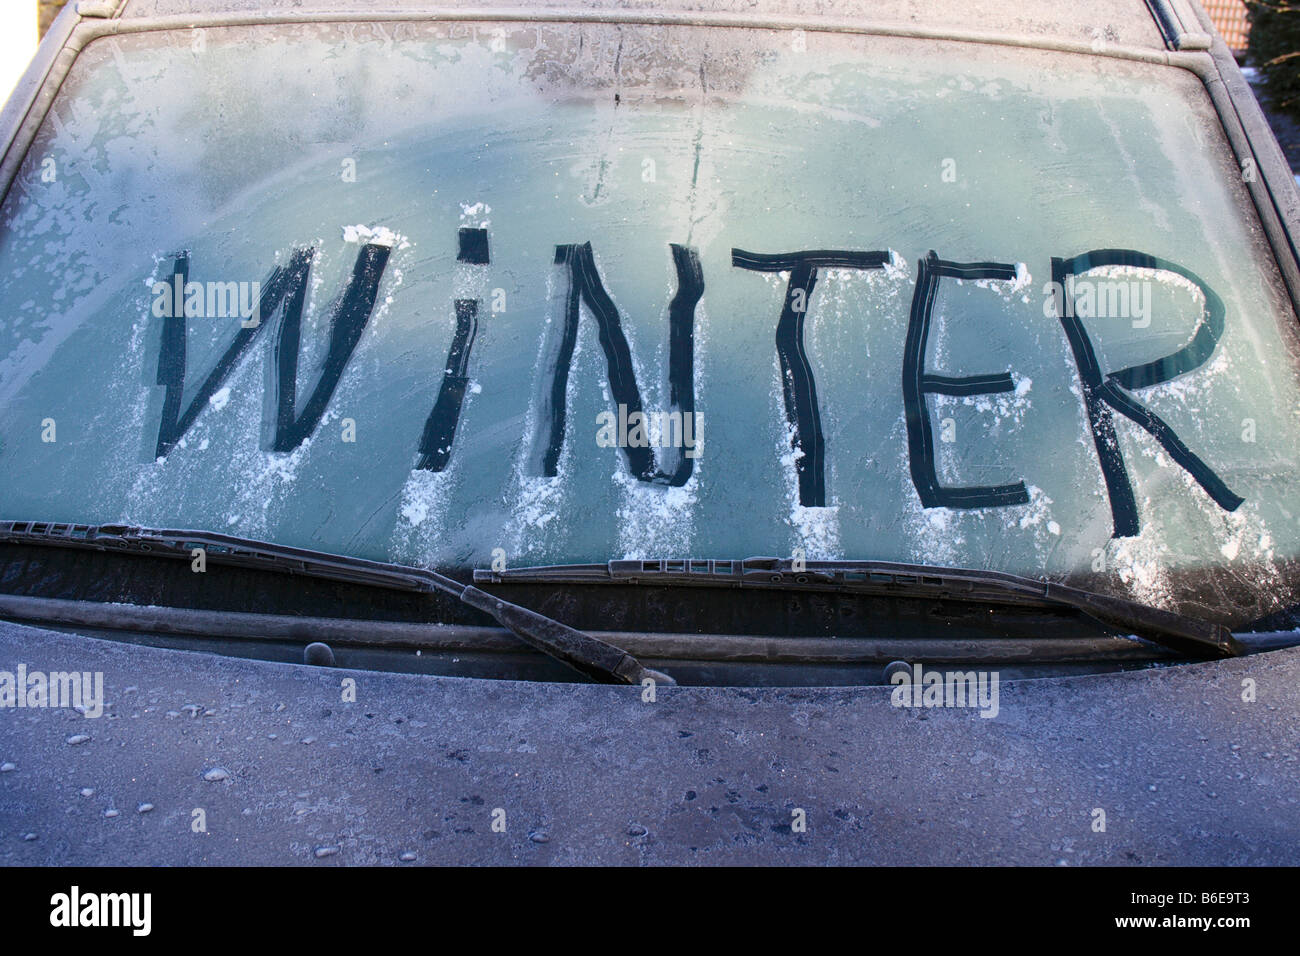 word 'WINTER' written on frozen windshield of a car. Photo by Willy Matheisl Stock Photo